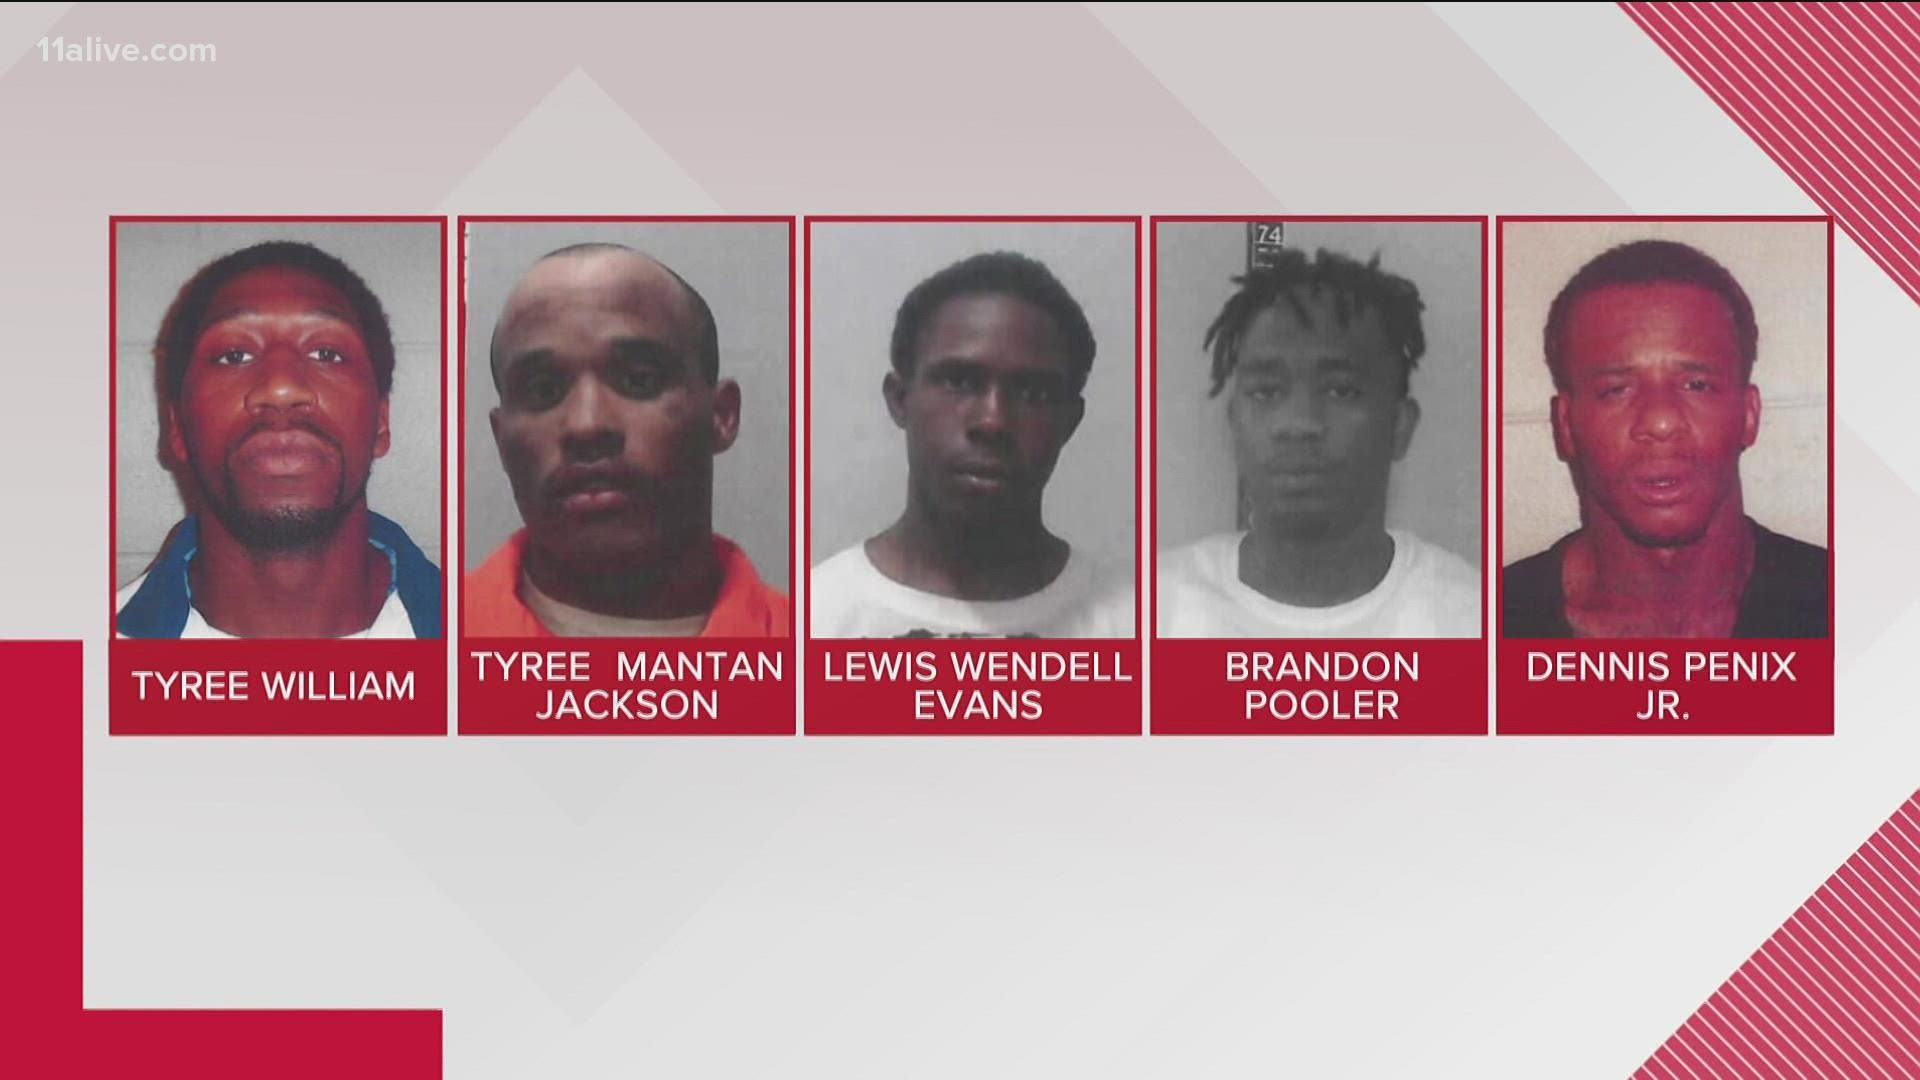 They escaped the Georgia prison on Friday.